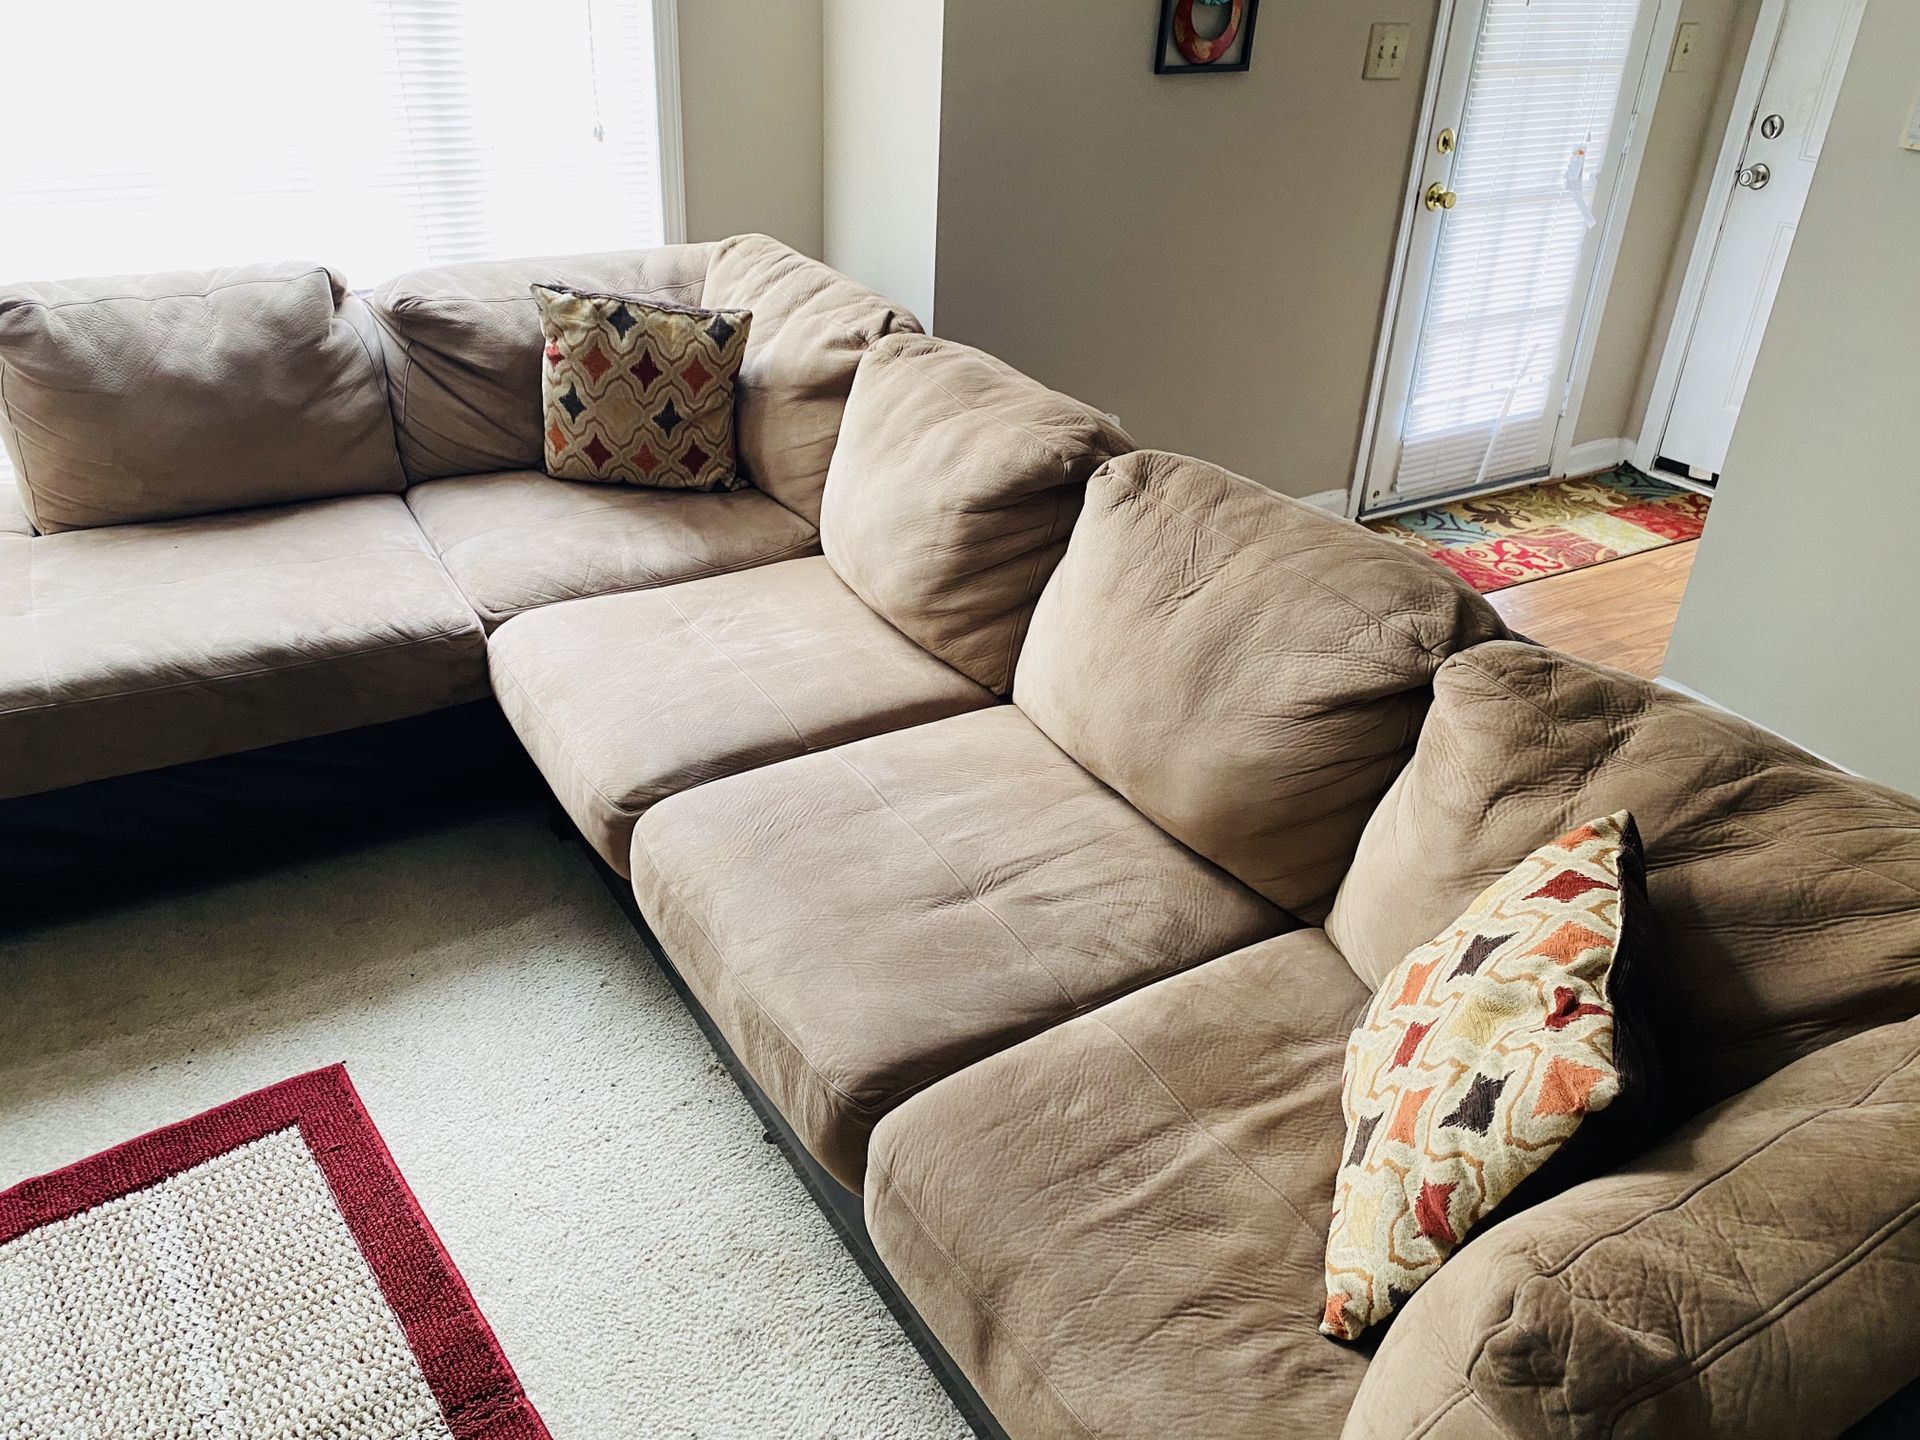 Sectional couch must go $100